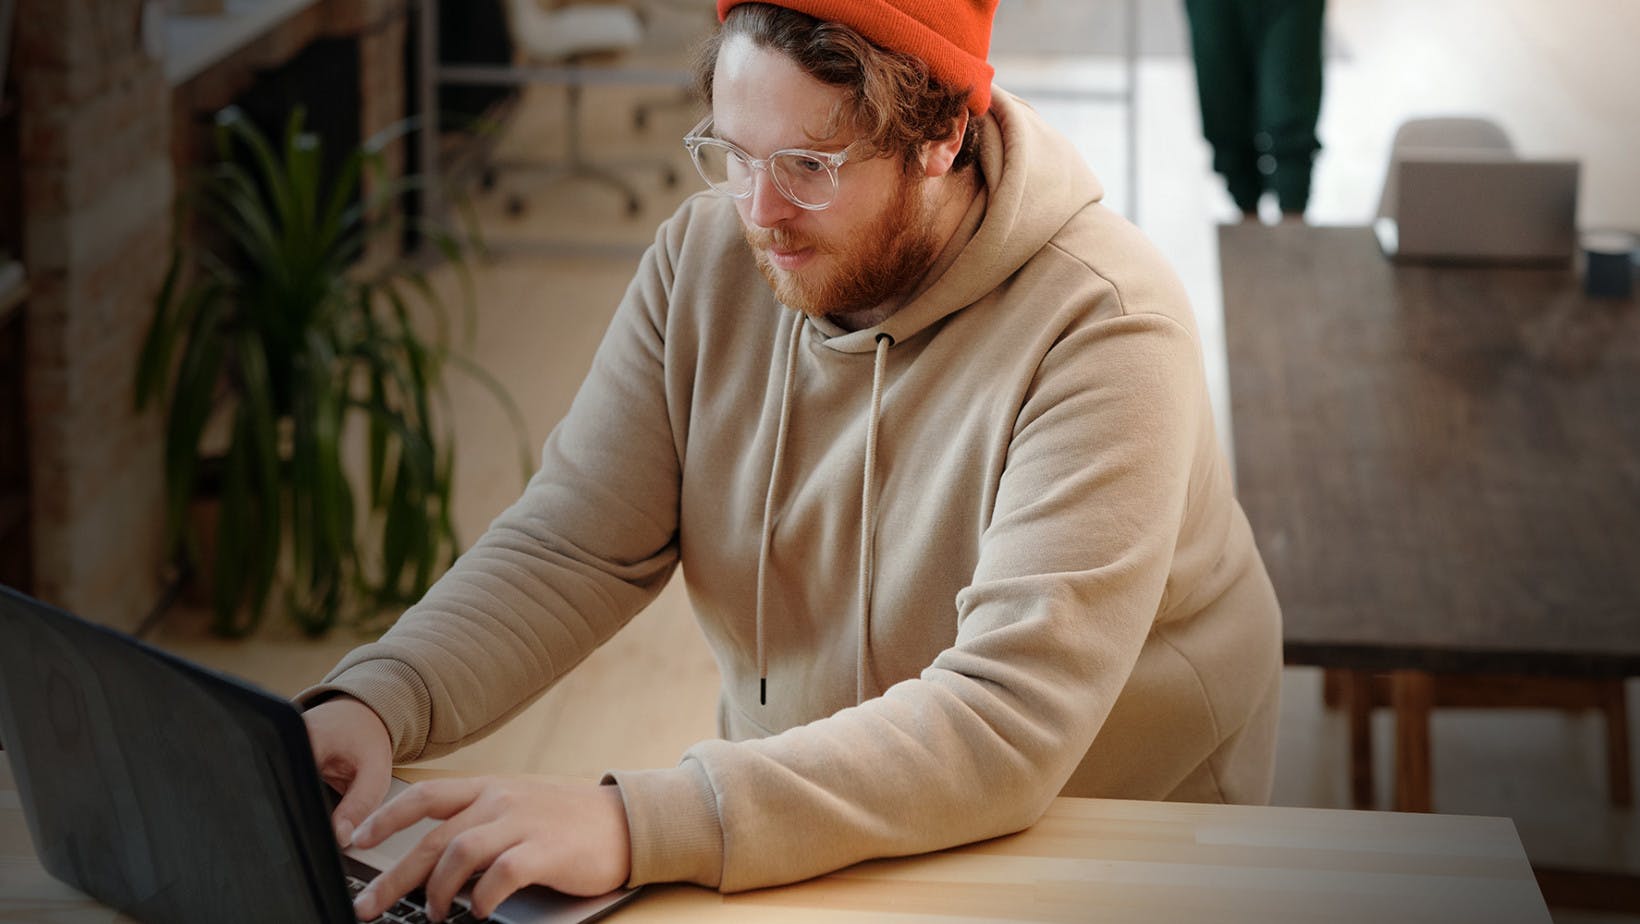 Male student with a hoodie and glasses on is researching scholarships on a laptop